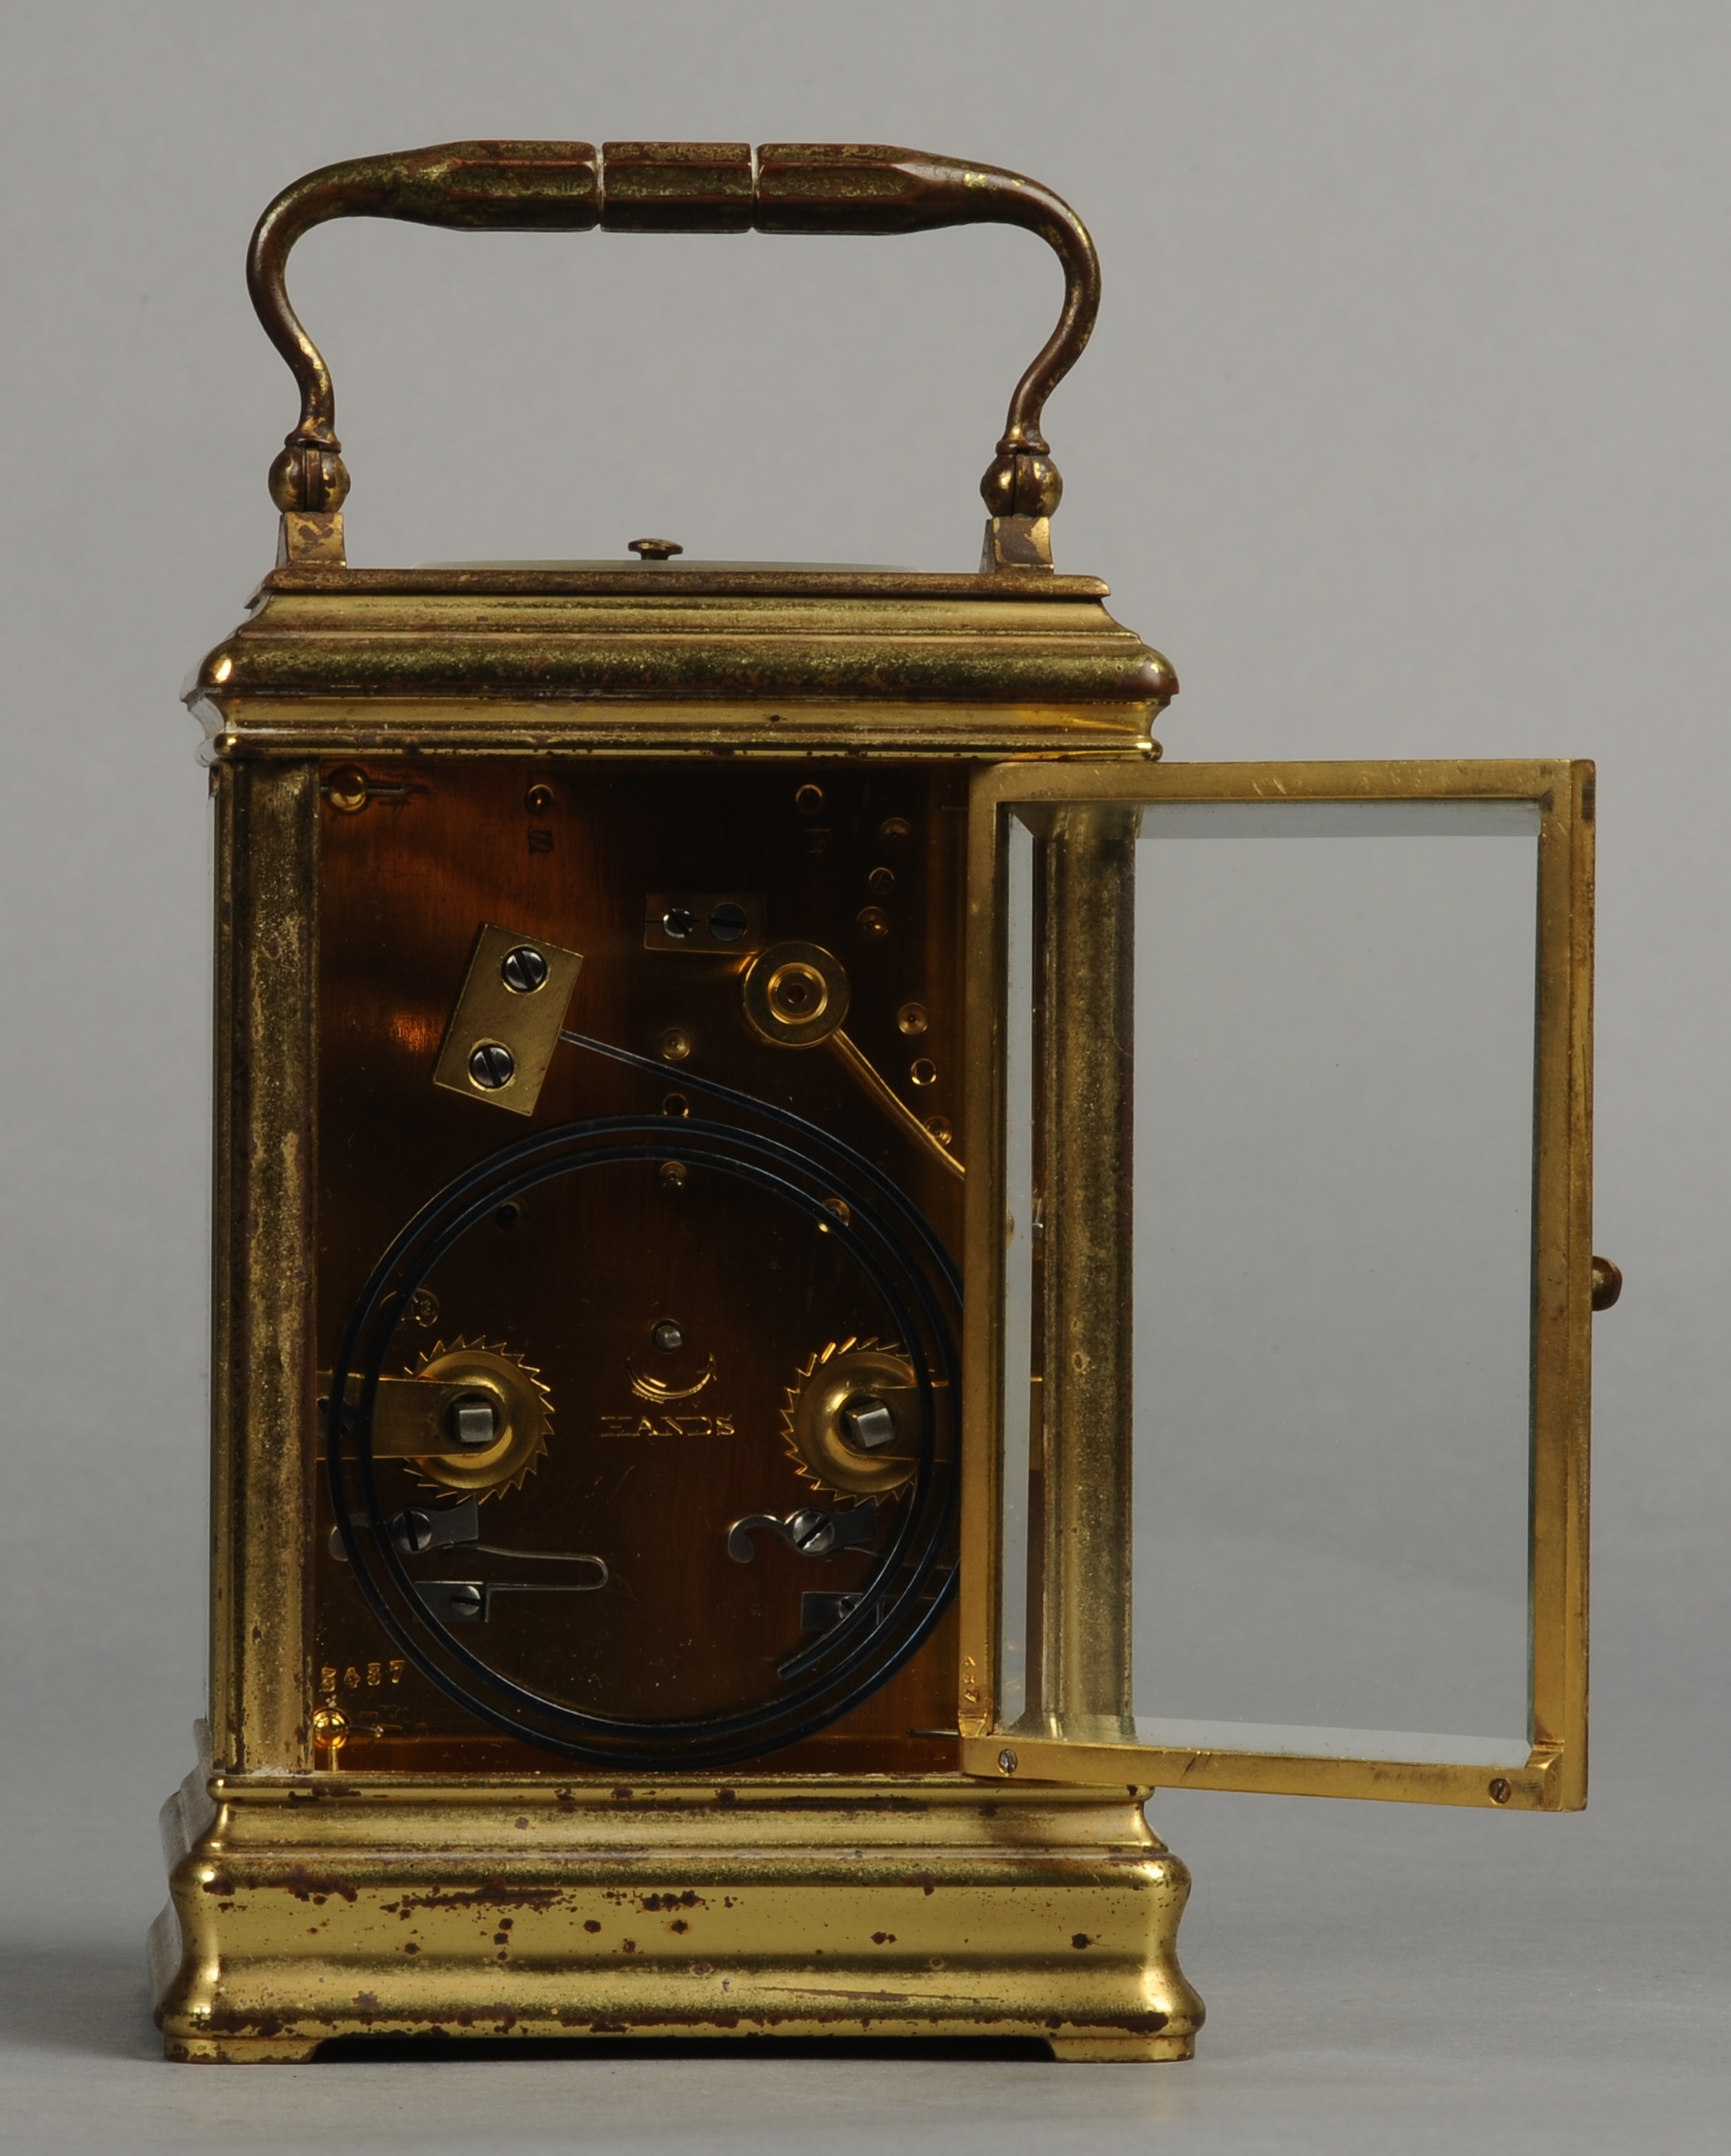 A LATE 19TH CENTURY FRENCH TWO TRAIN CARRIAGE CLOCK WITH ALARUM MOVEMENT, - Image 3 of 8